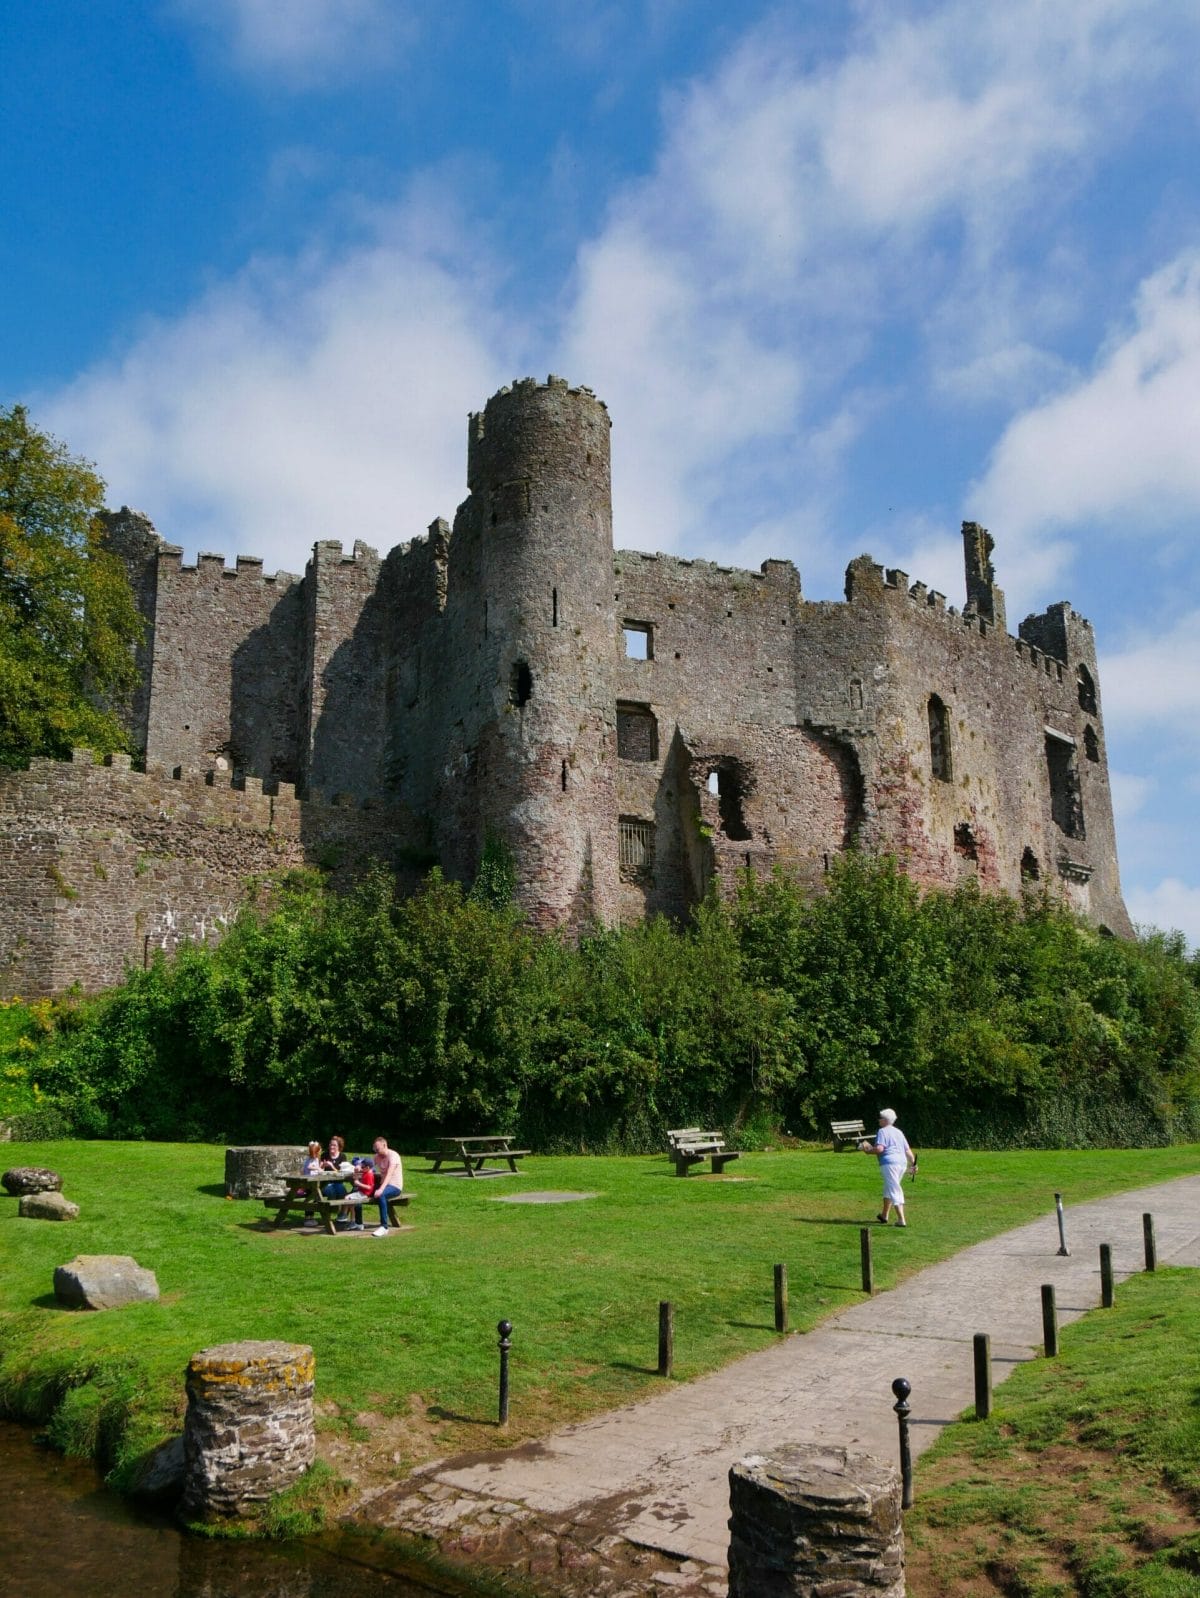 Laugharne castle Wales with people in front on the grass